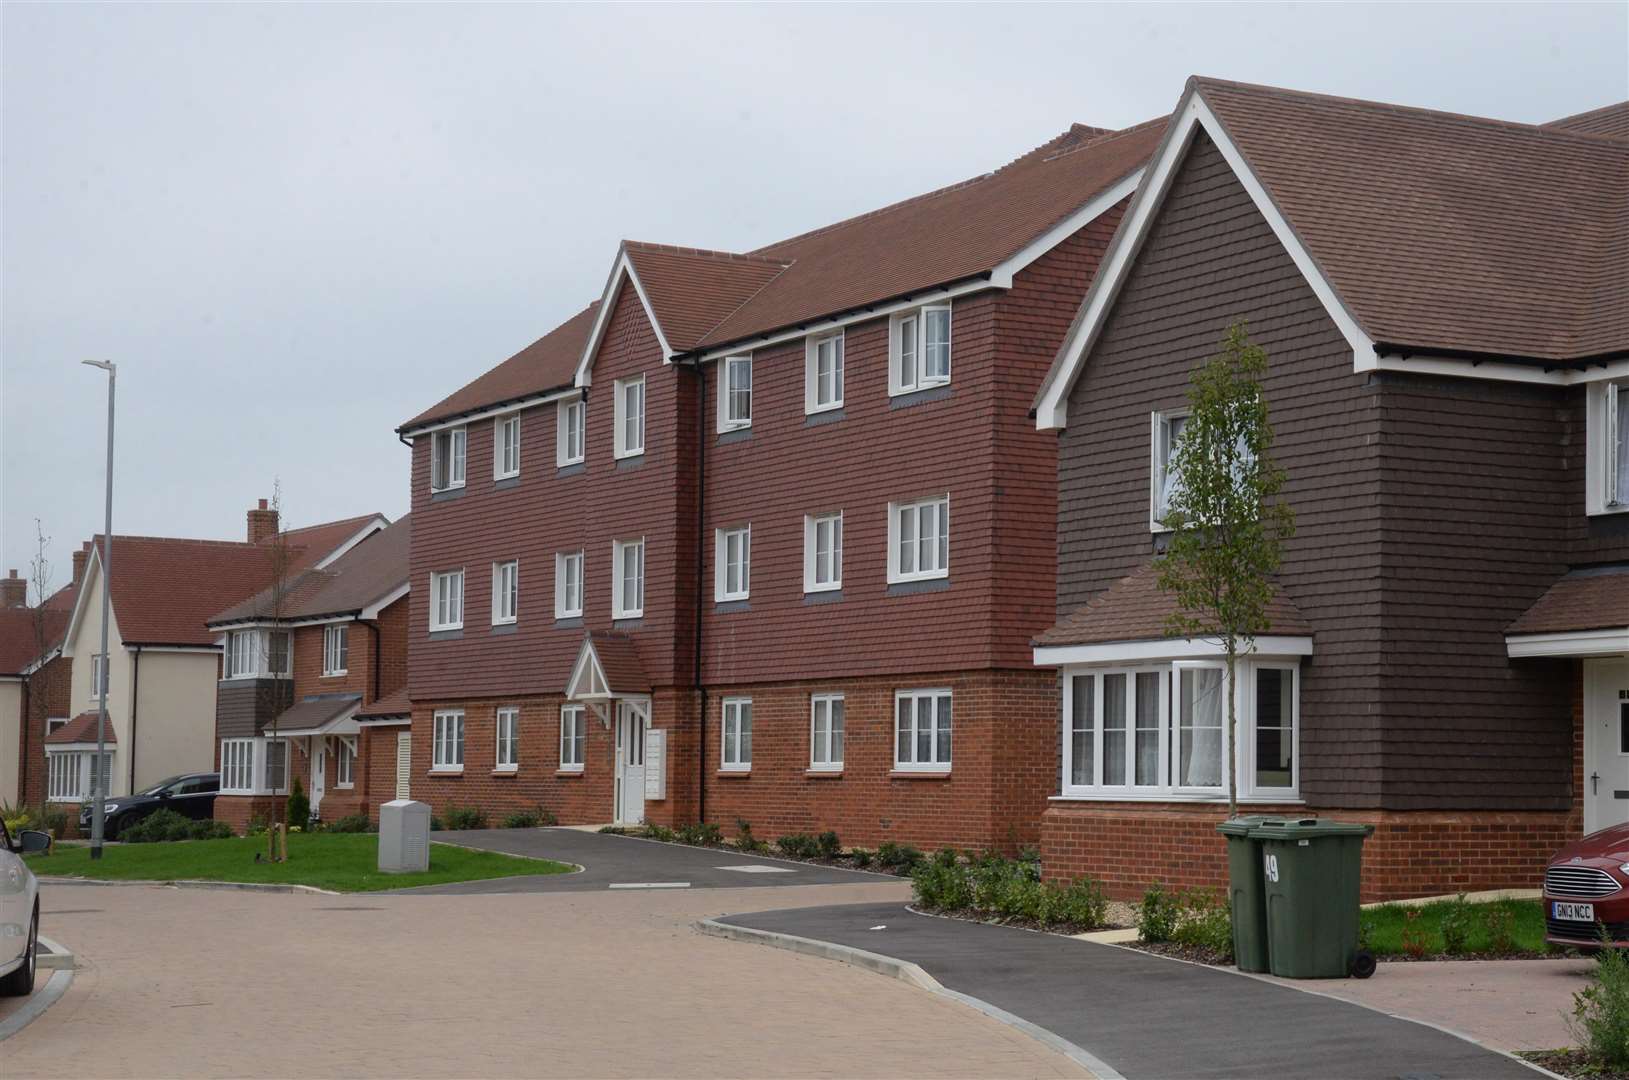 The existing Orchard Fields development off Hermitage Lane, Aylesford.